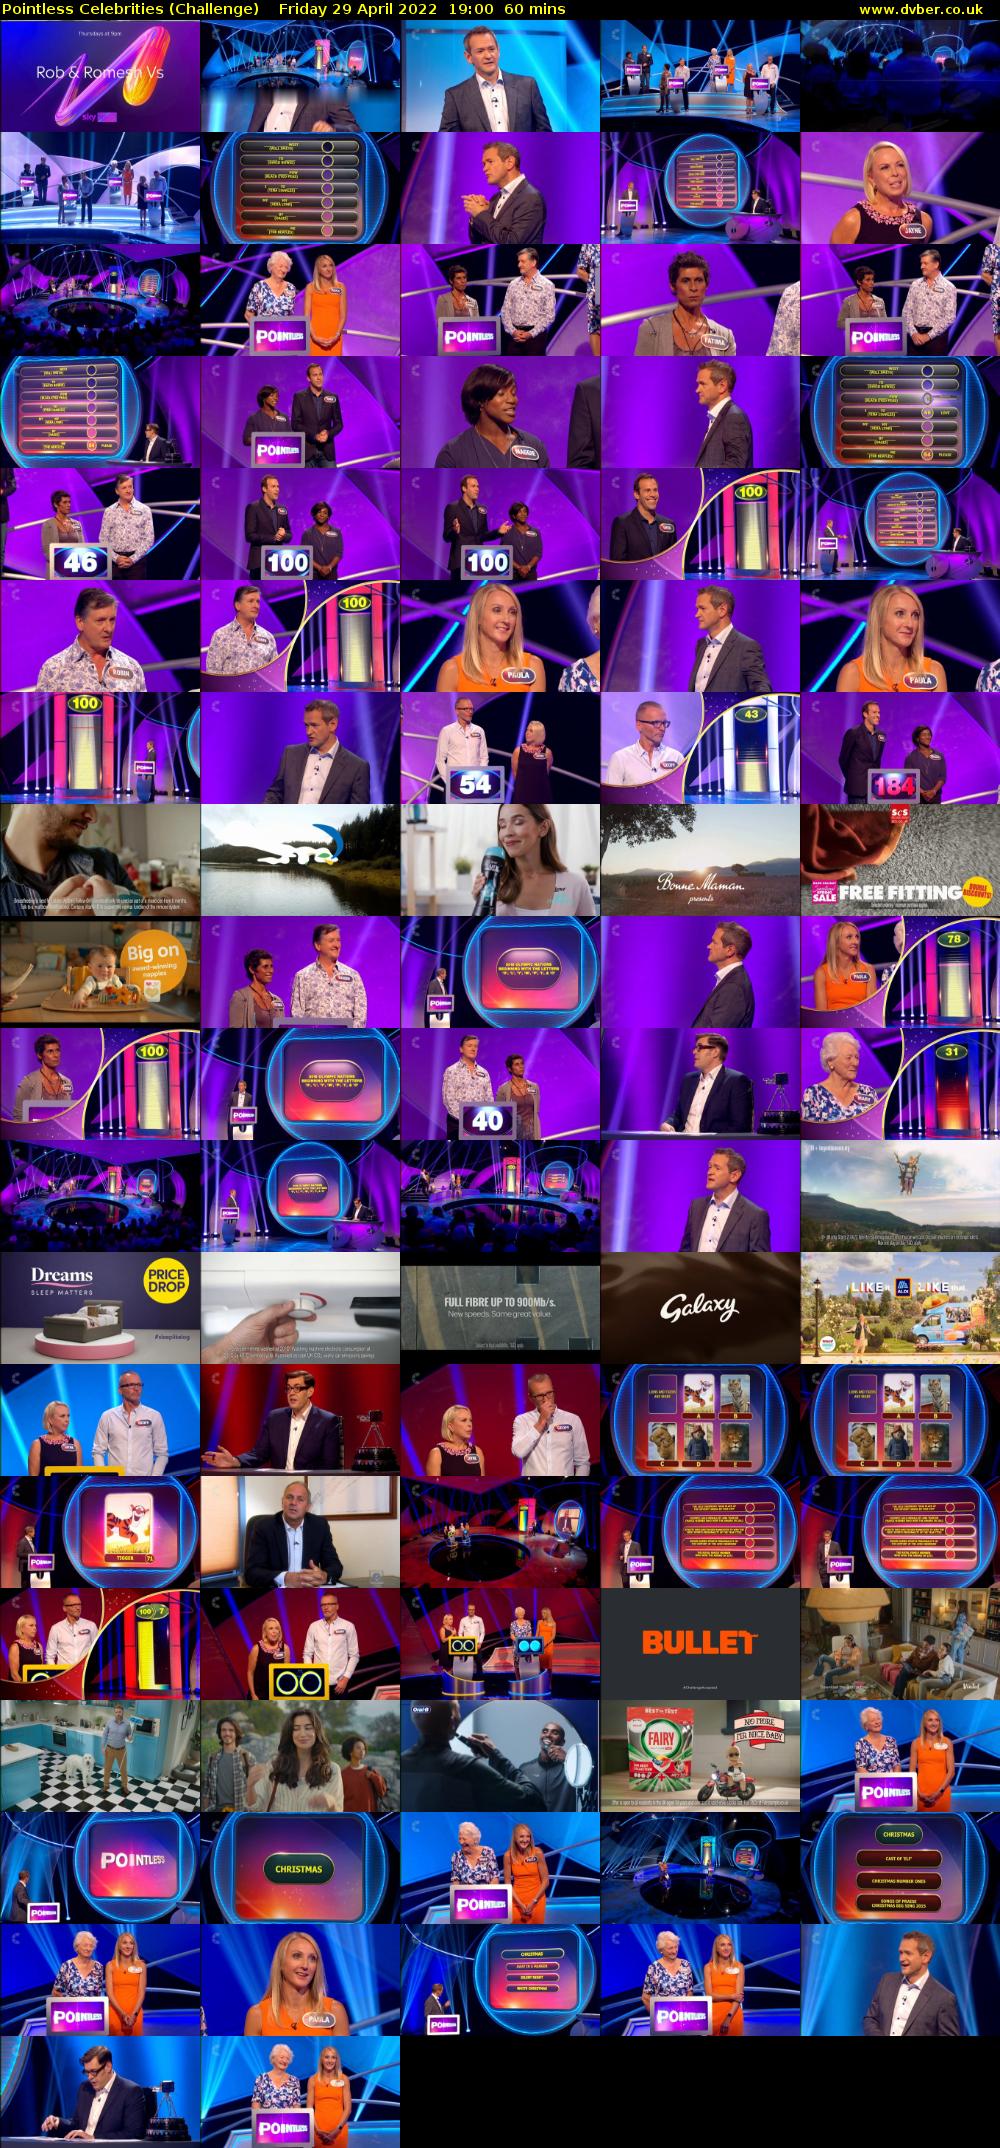 Pointless Celebrities (Challenge) Friday 29 April 2022 19:00 - 20:00